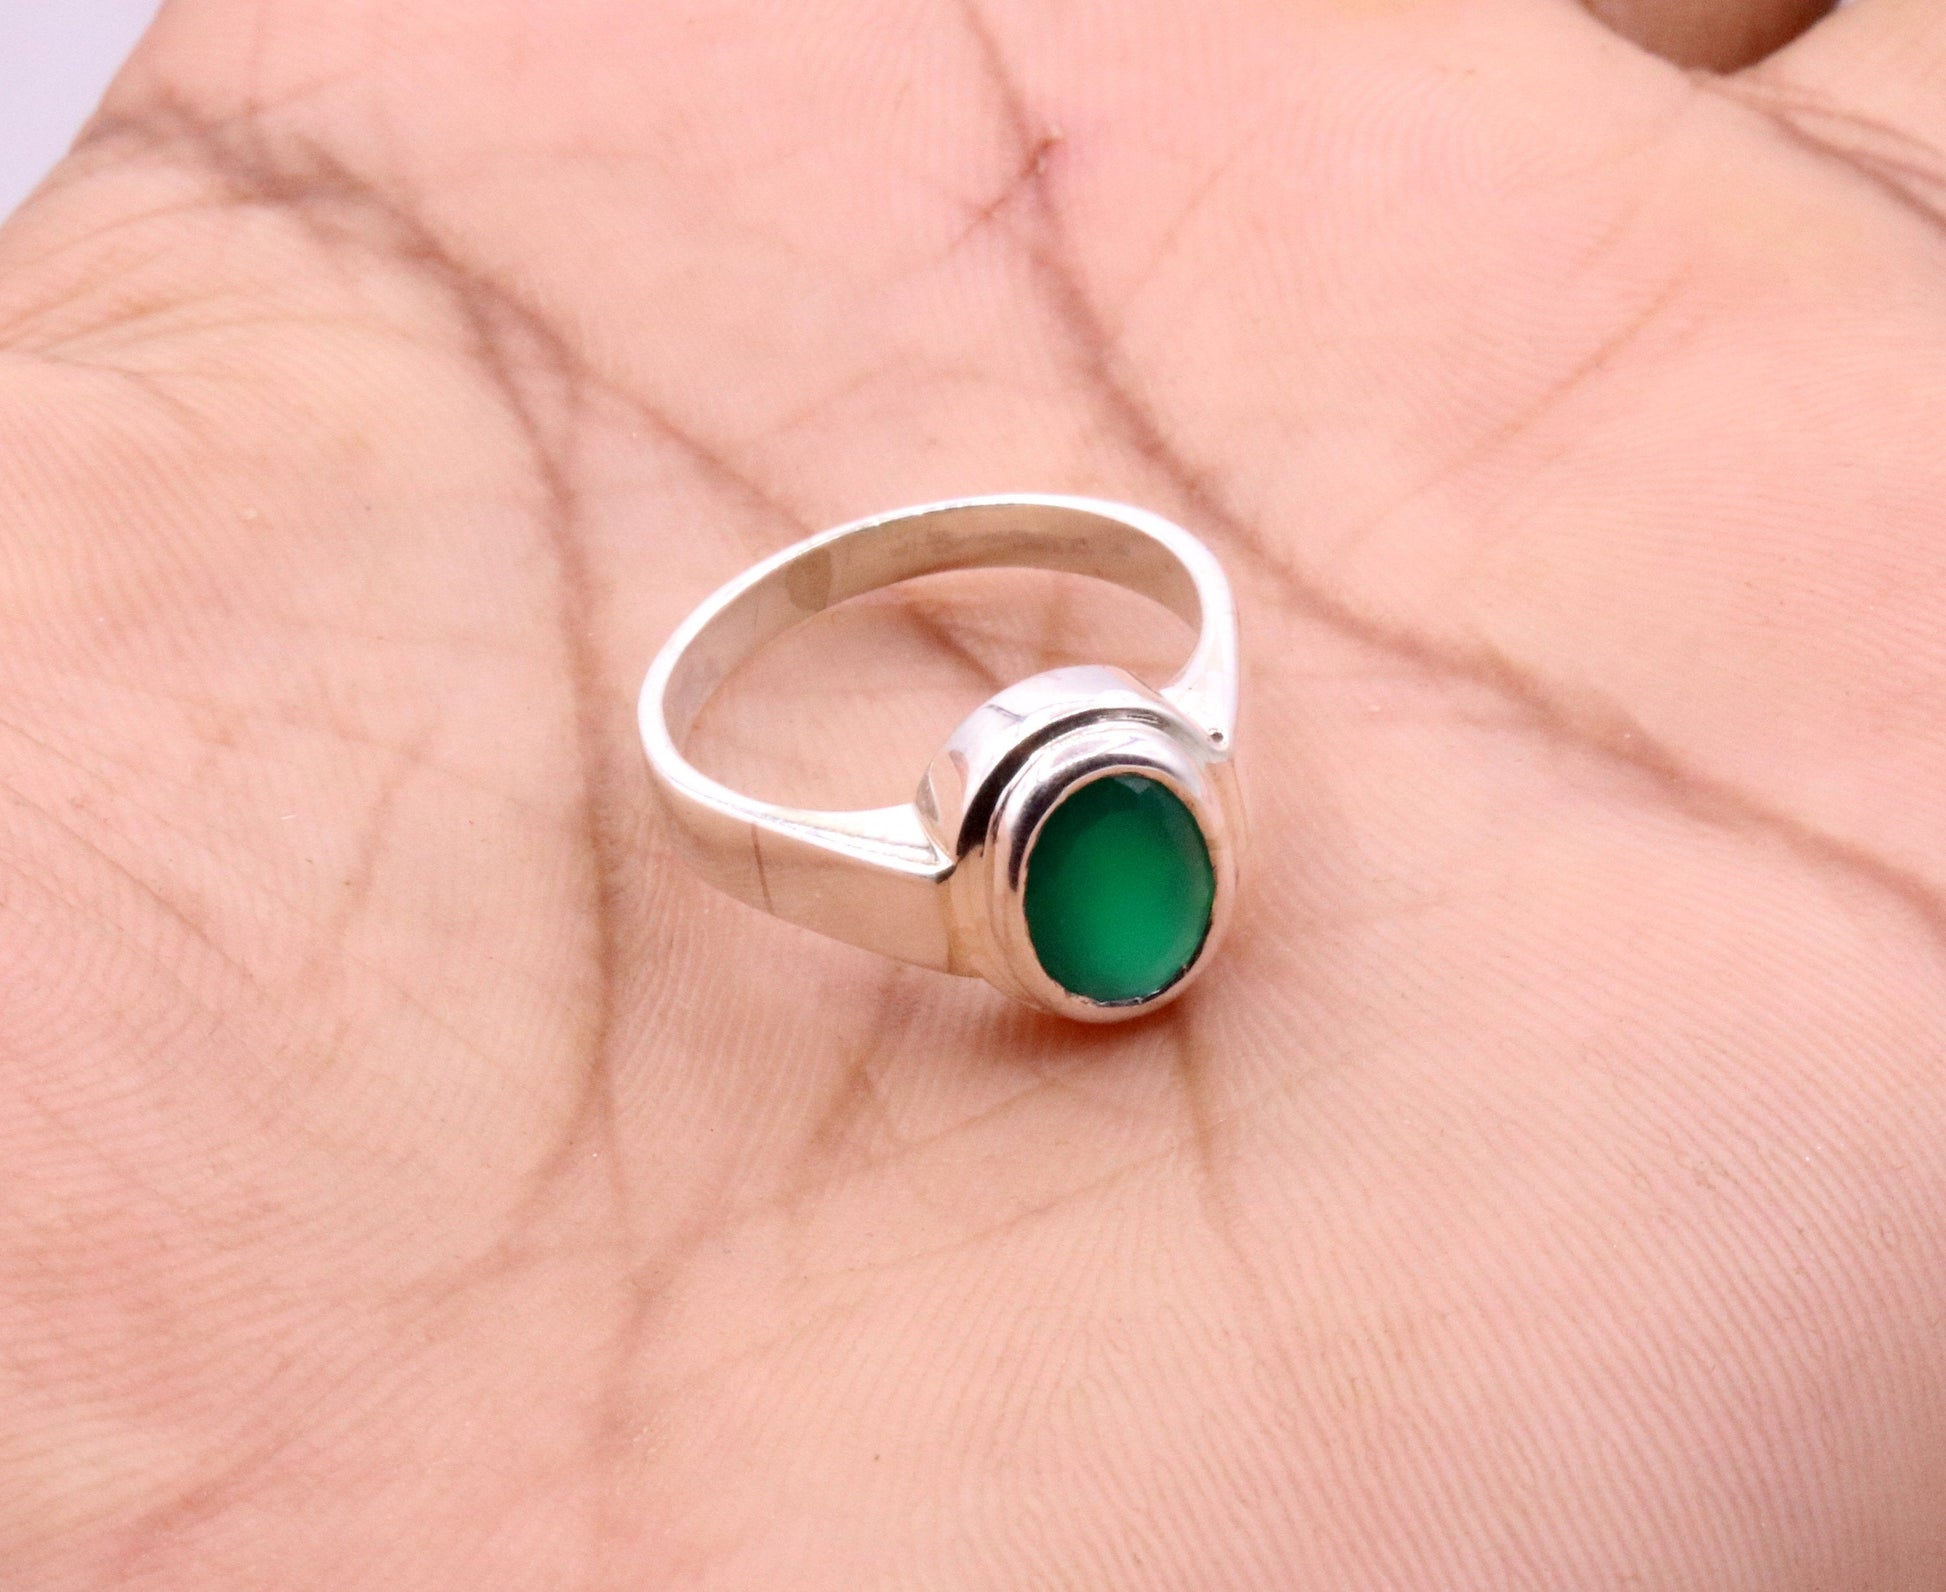 Fabulous green stone Solid silver handmade ring band with gorgeous unisex ring from india sr-59 - TRIBAL ORNAMENTS